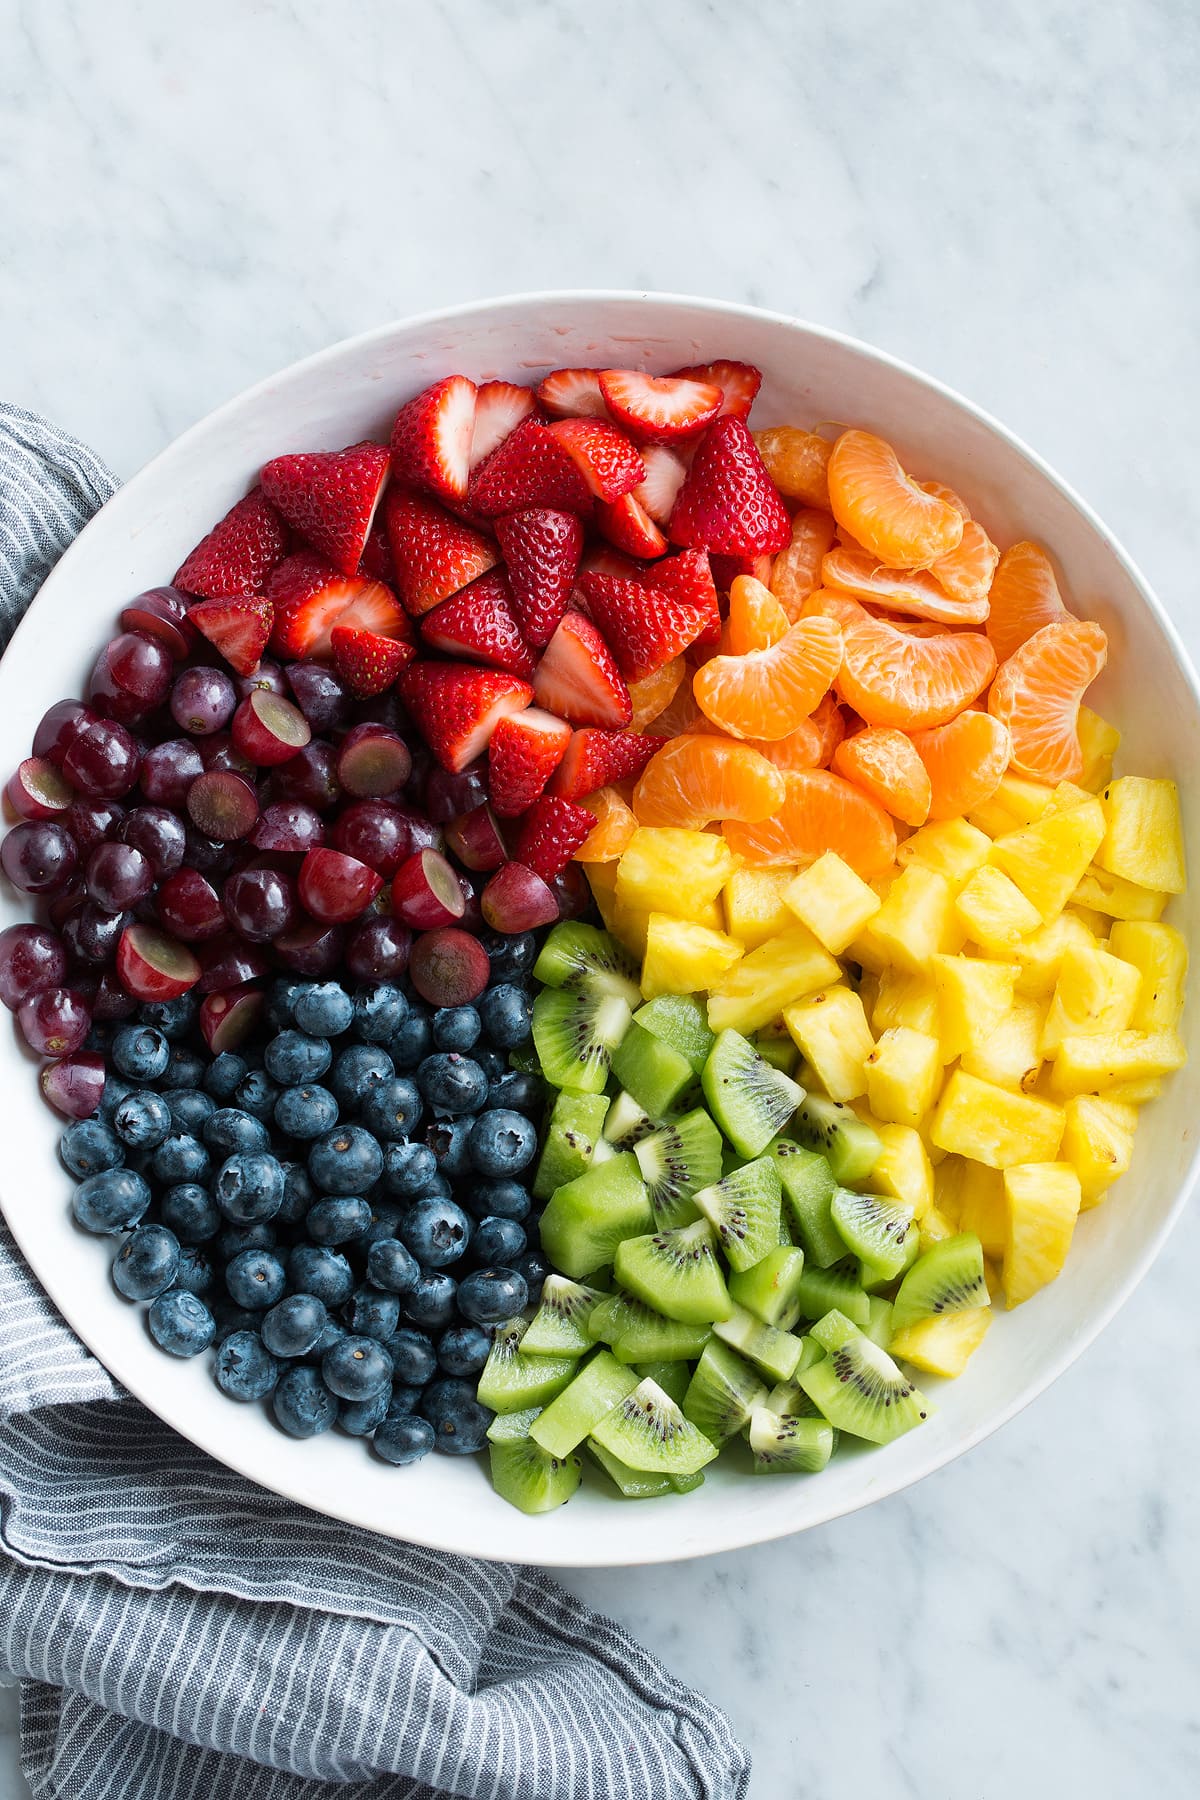 Fresh strawberries, citrus, pineapple, kiwi, blueberries and grapes in a large white bowl.